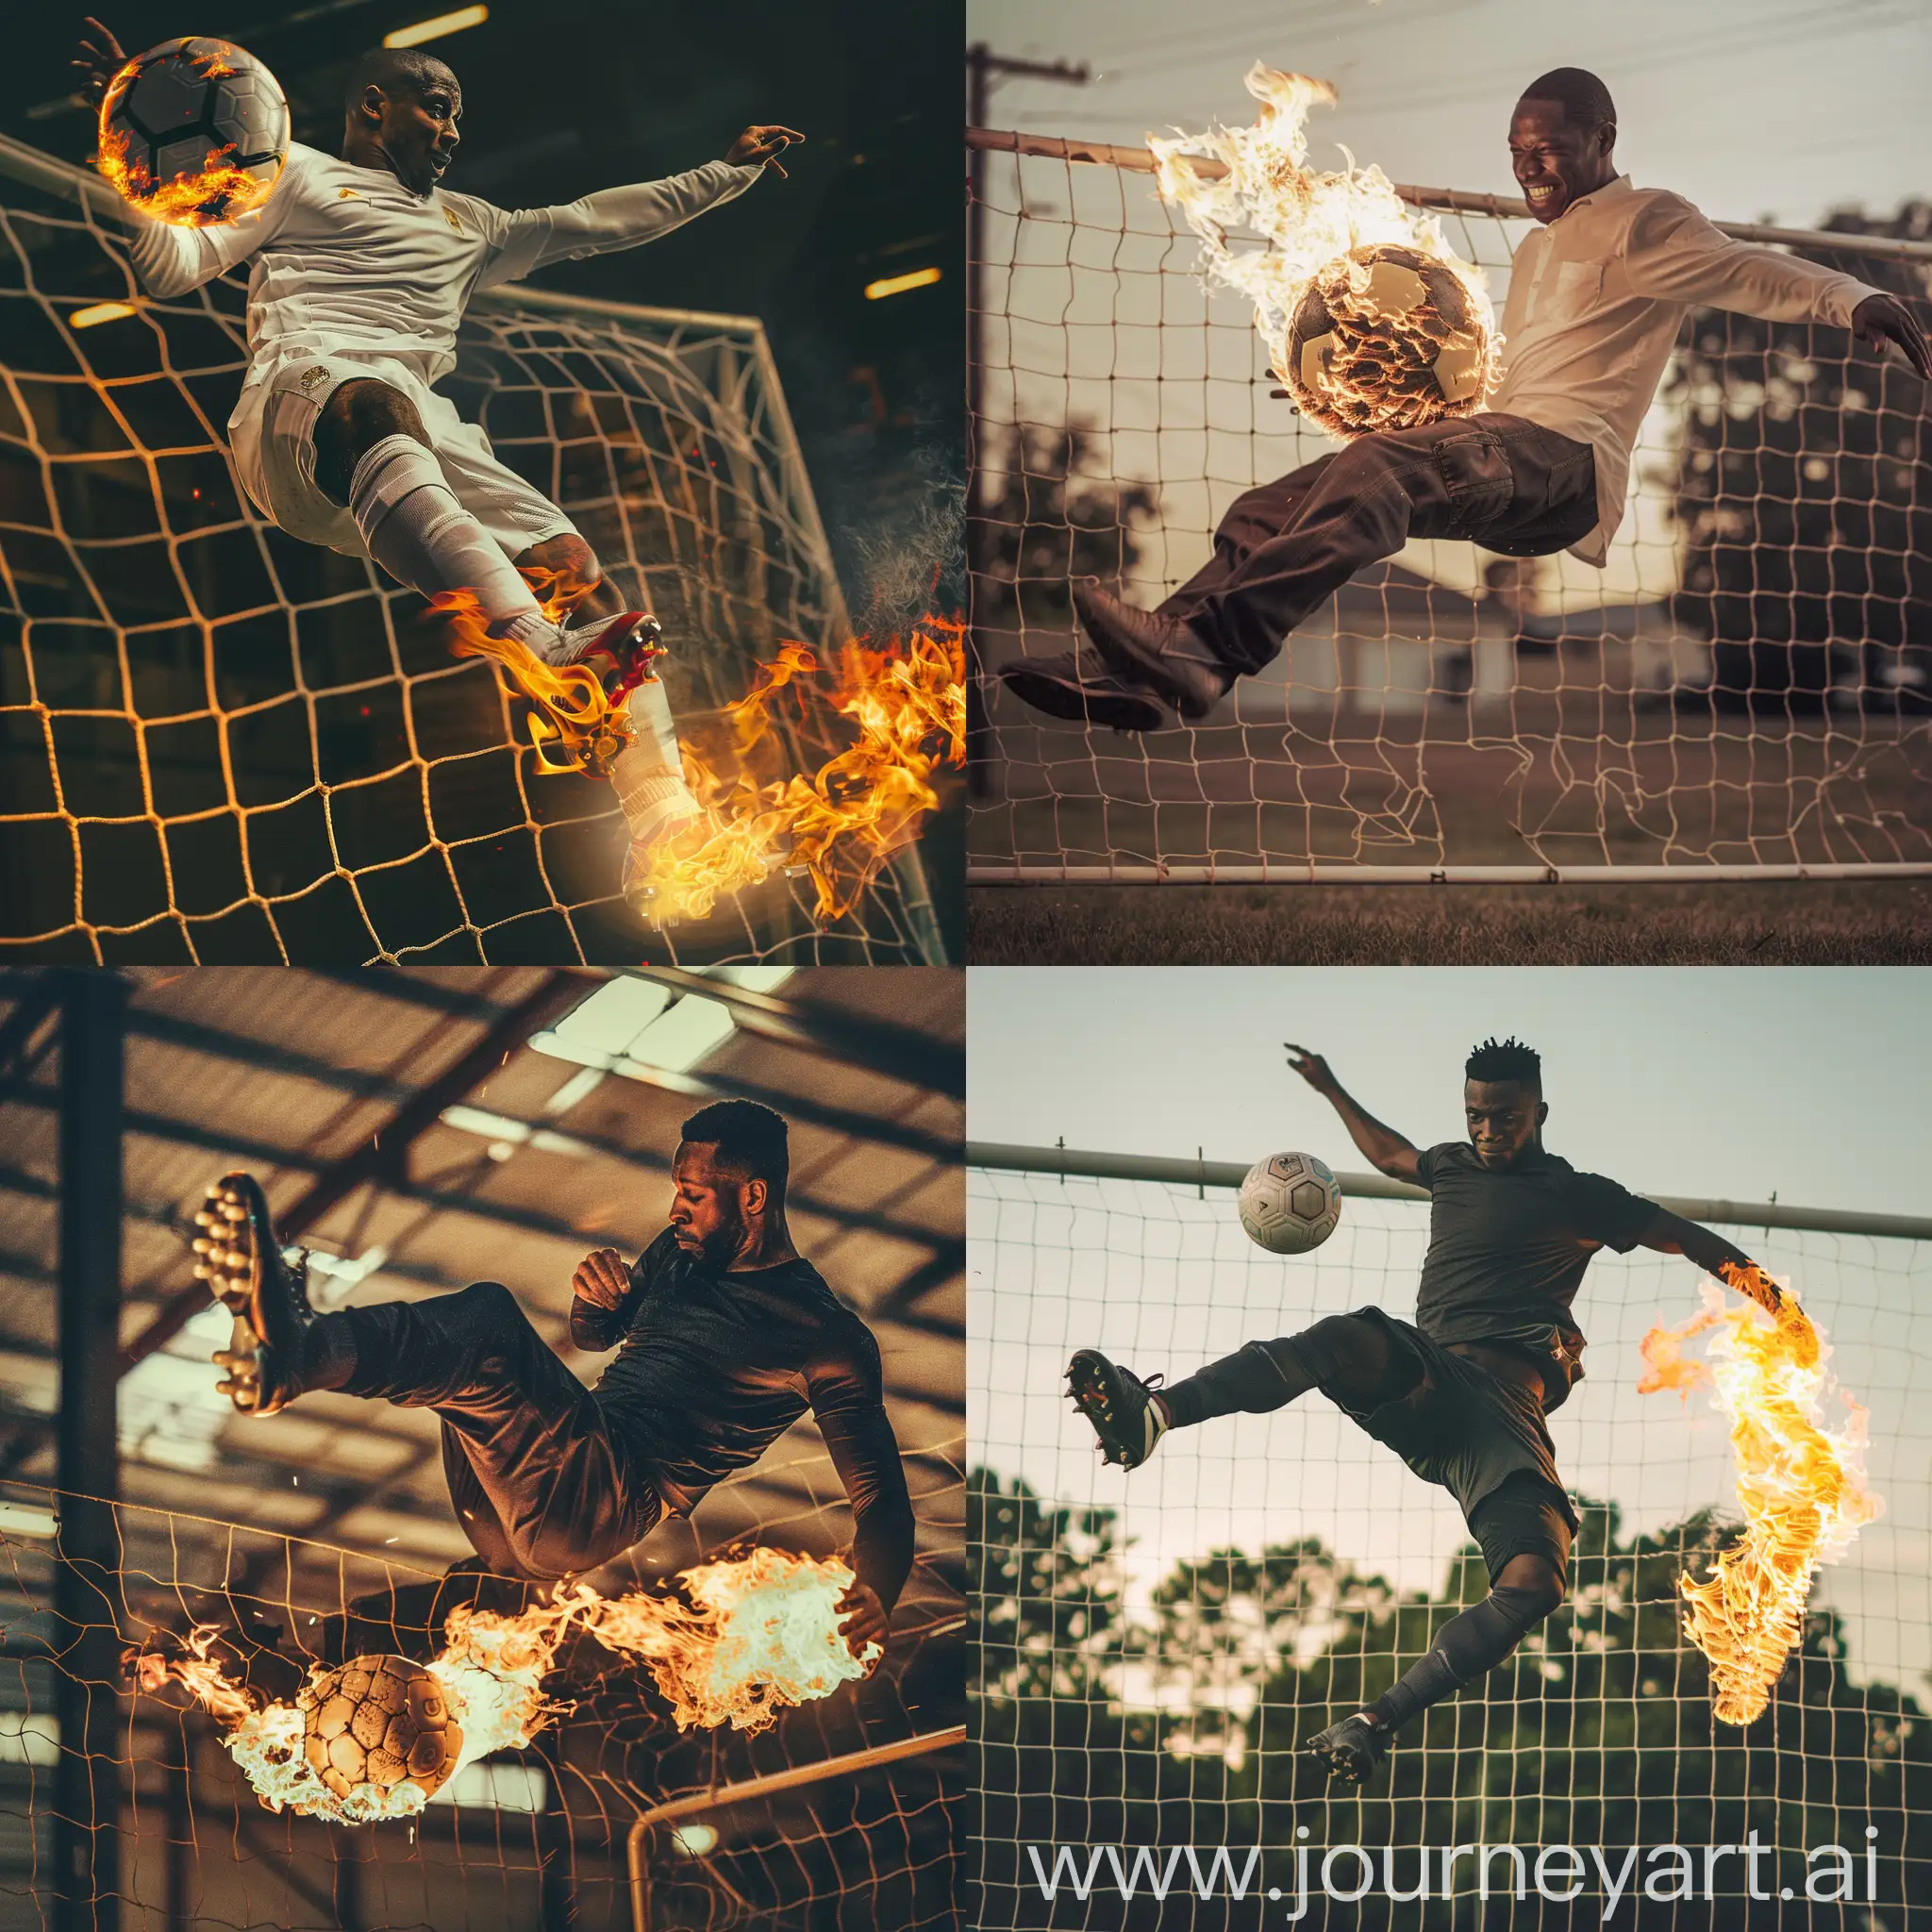 African american male doing an arial kick over the net with a ball on fire